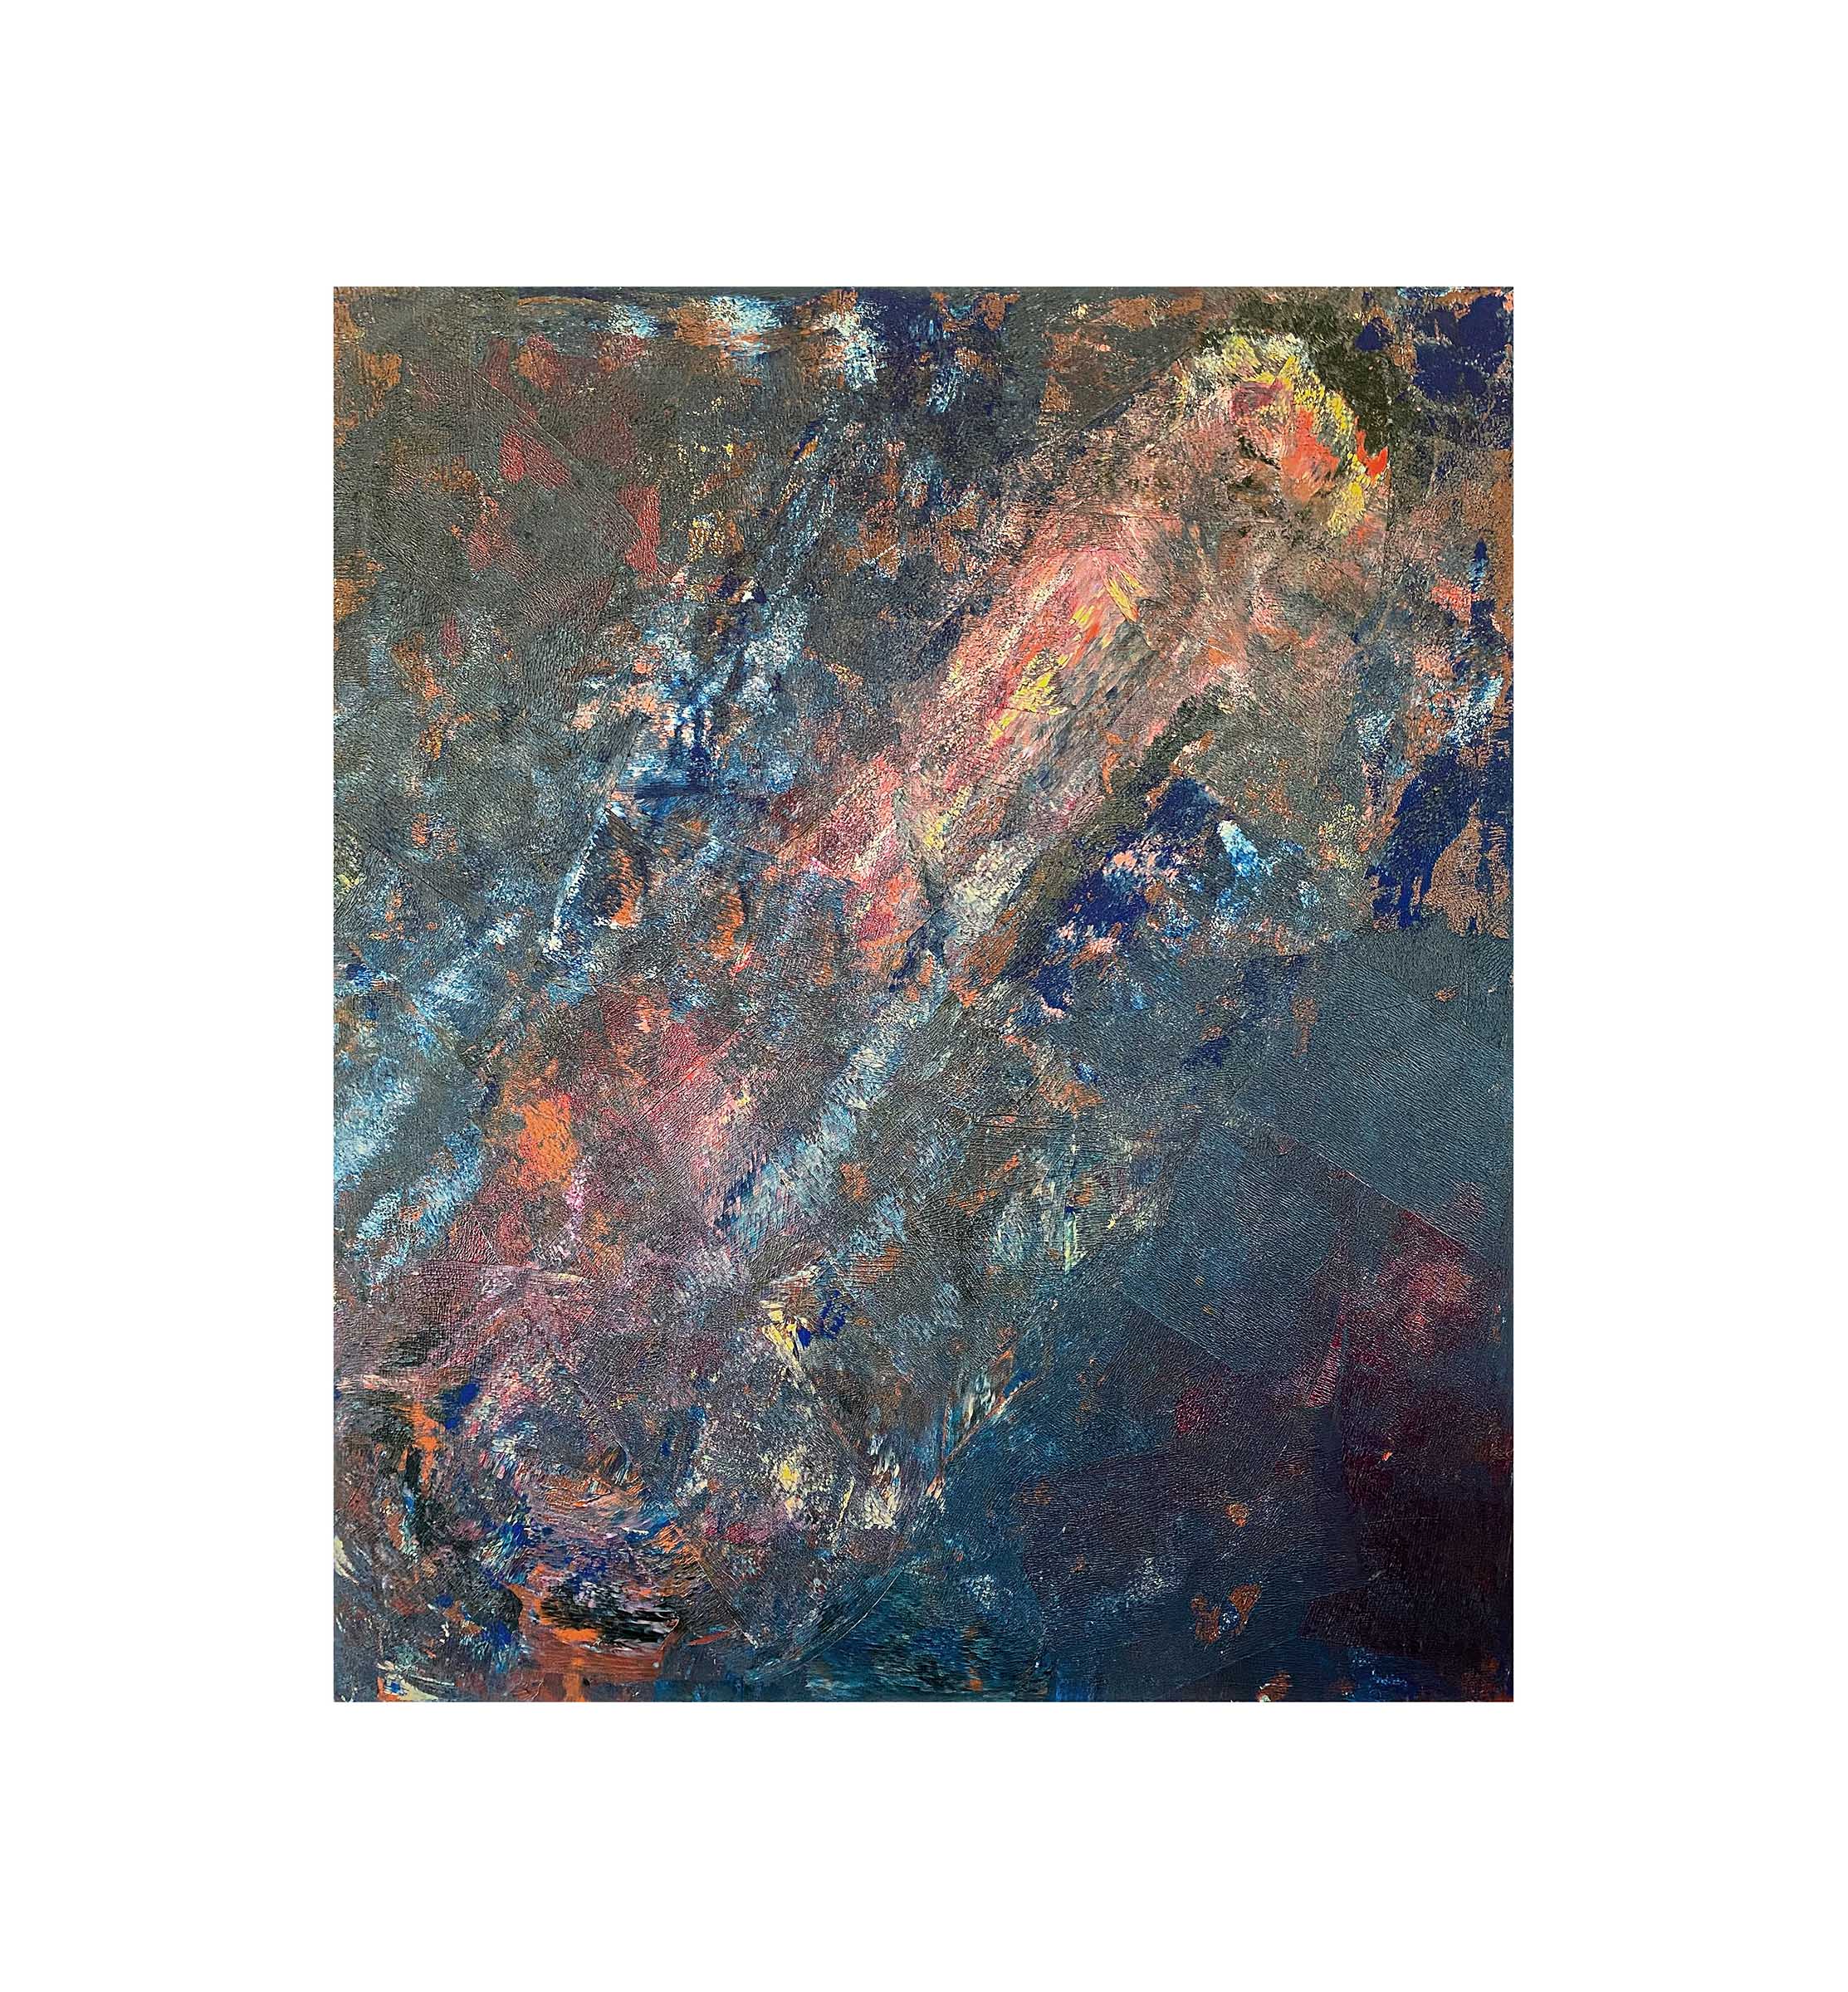 Photograph of the painting Galactic Fallace